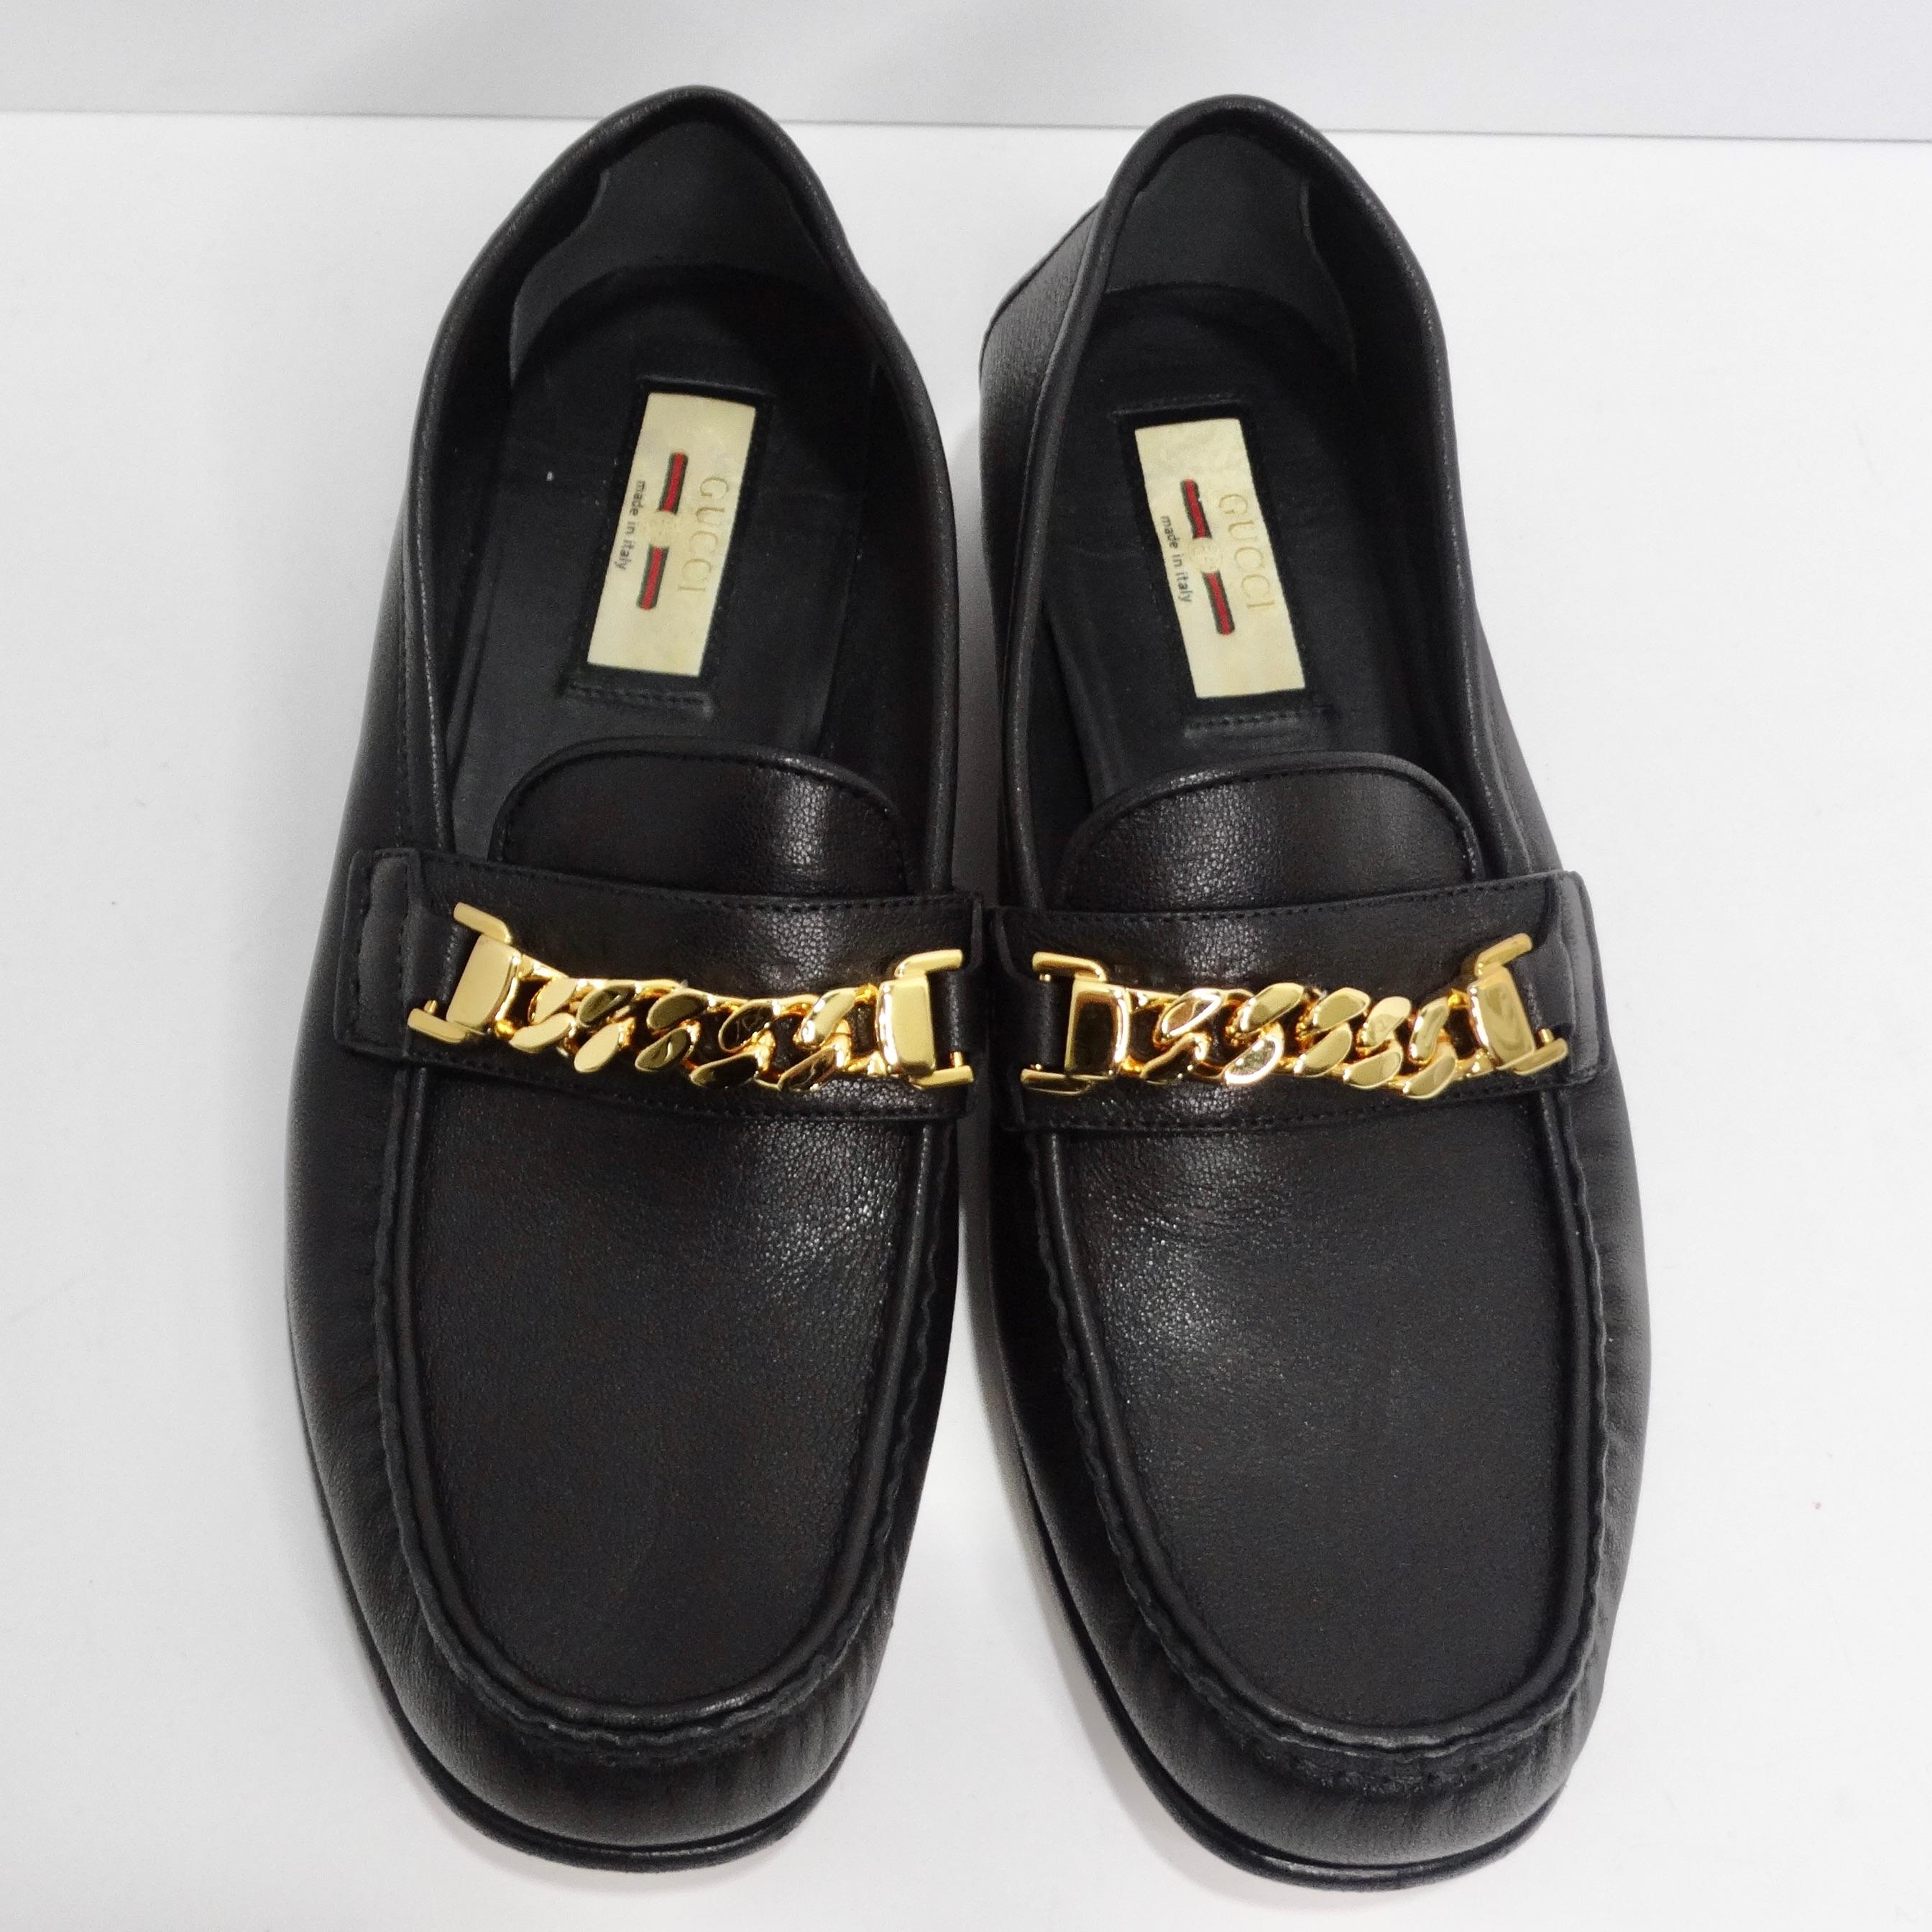 Introducing the Gucci Sylvie Gold Tone Chain Loafers in Black Leather, a timeless and versatile addition to your footwear collection that effortlessly combines classic style with a touch of luxury. These black leather loafers are a true embodiment